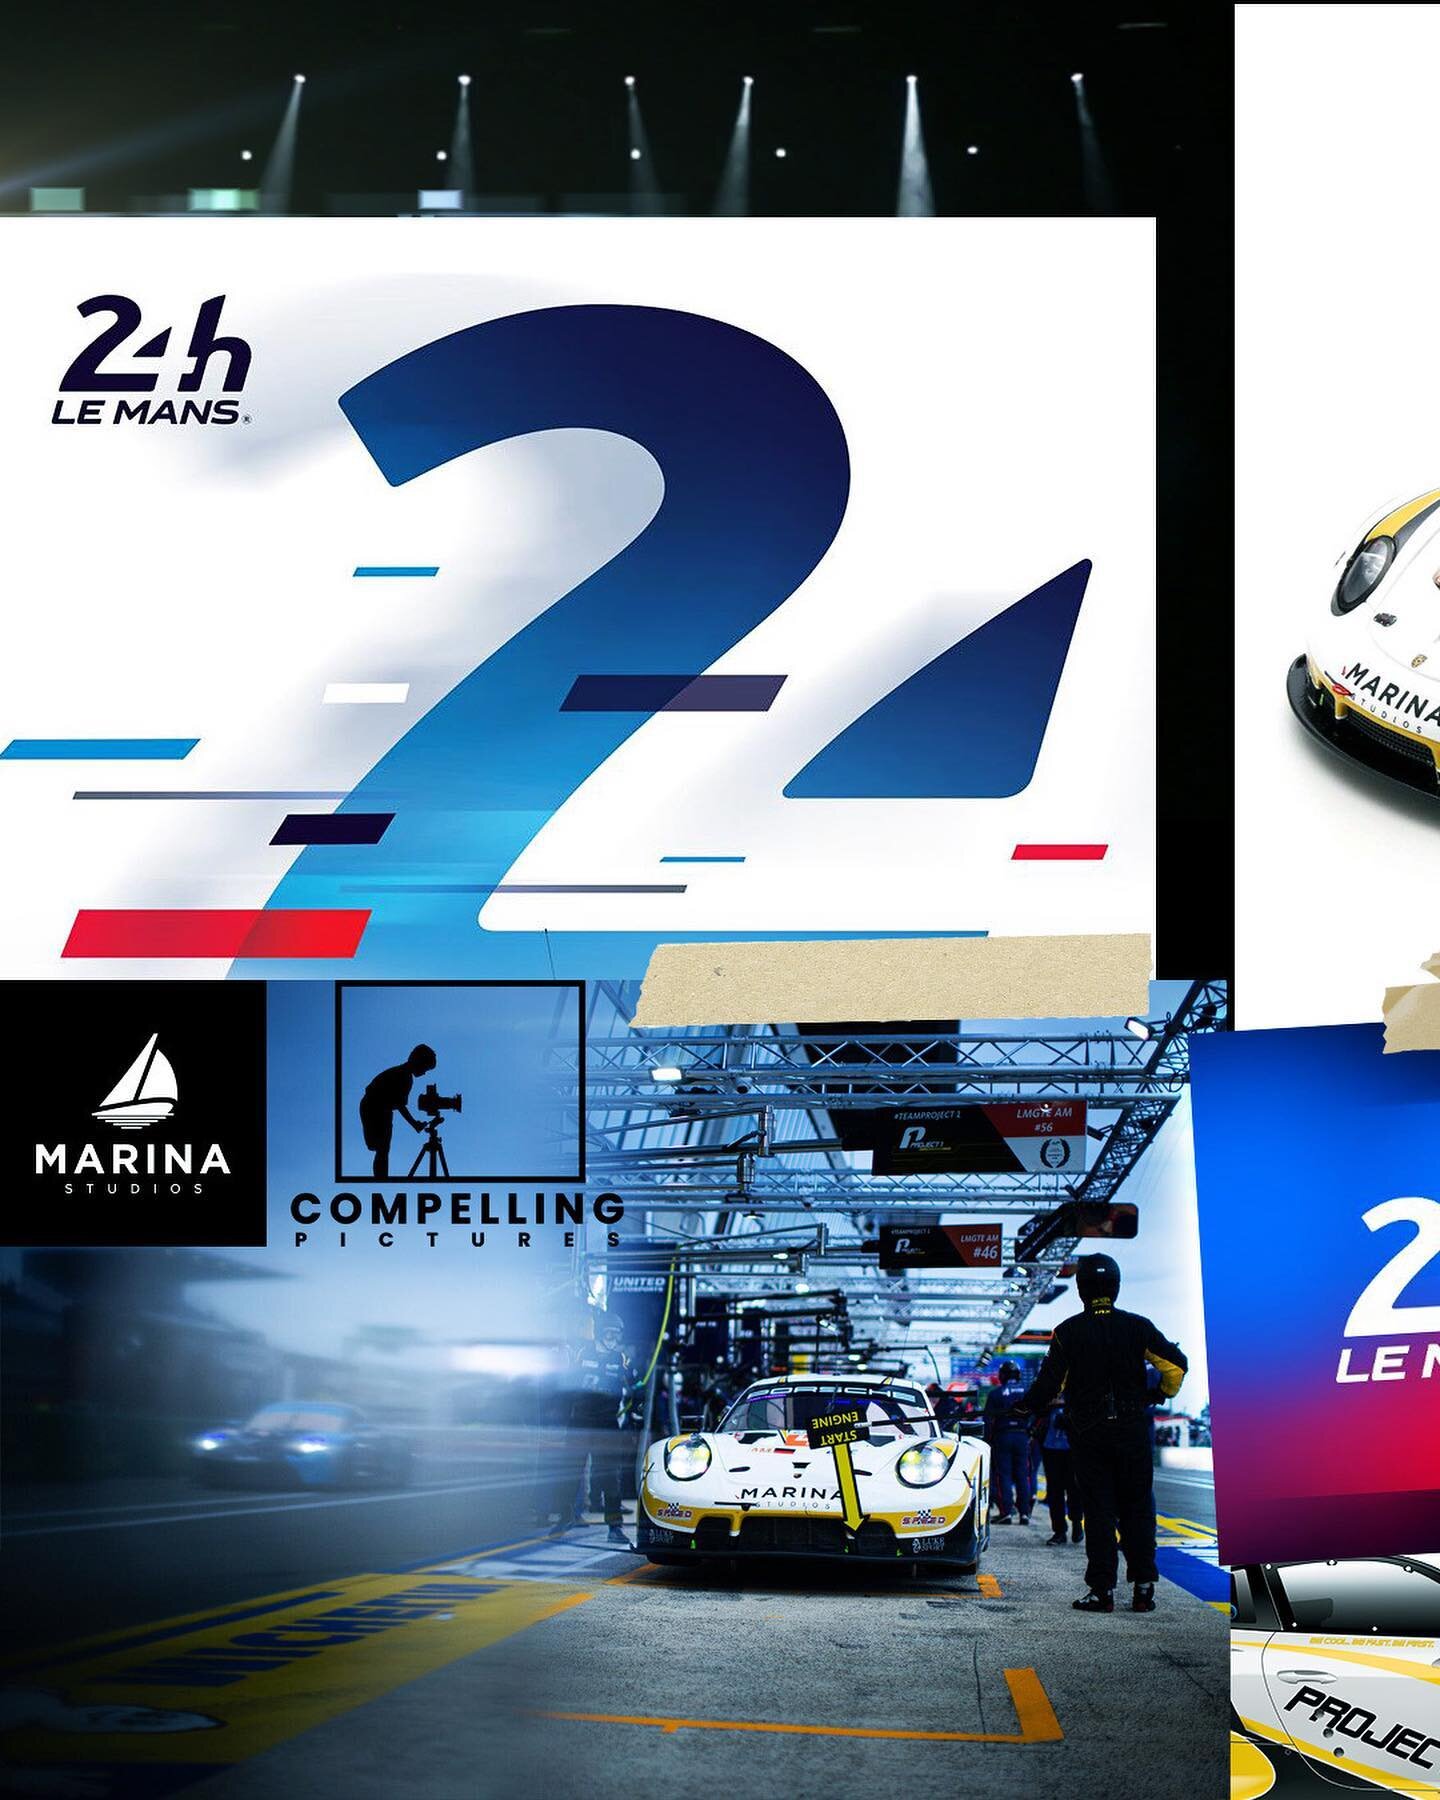 SWIPE LEFT to see more.
Fun fact: In 2021 @marinastudios_boston and Compelling Pictures were proud sponsors of #teamproject1 in the 89th annual &ldquo;24 hours of Le Mans&rdquo; endurance race. 

The event drew in over 50,000 spectators and was held 